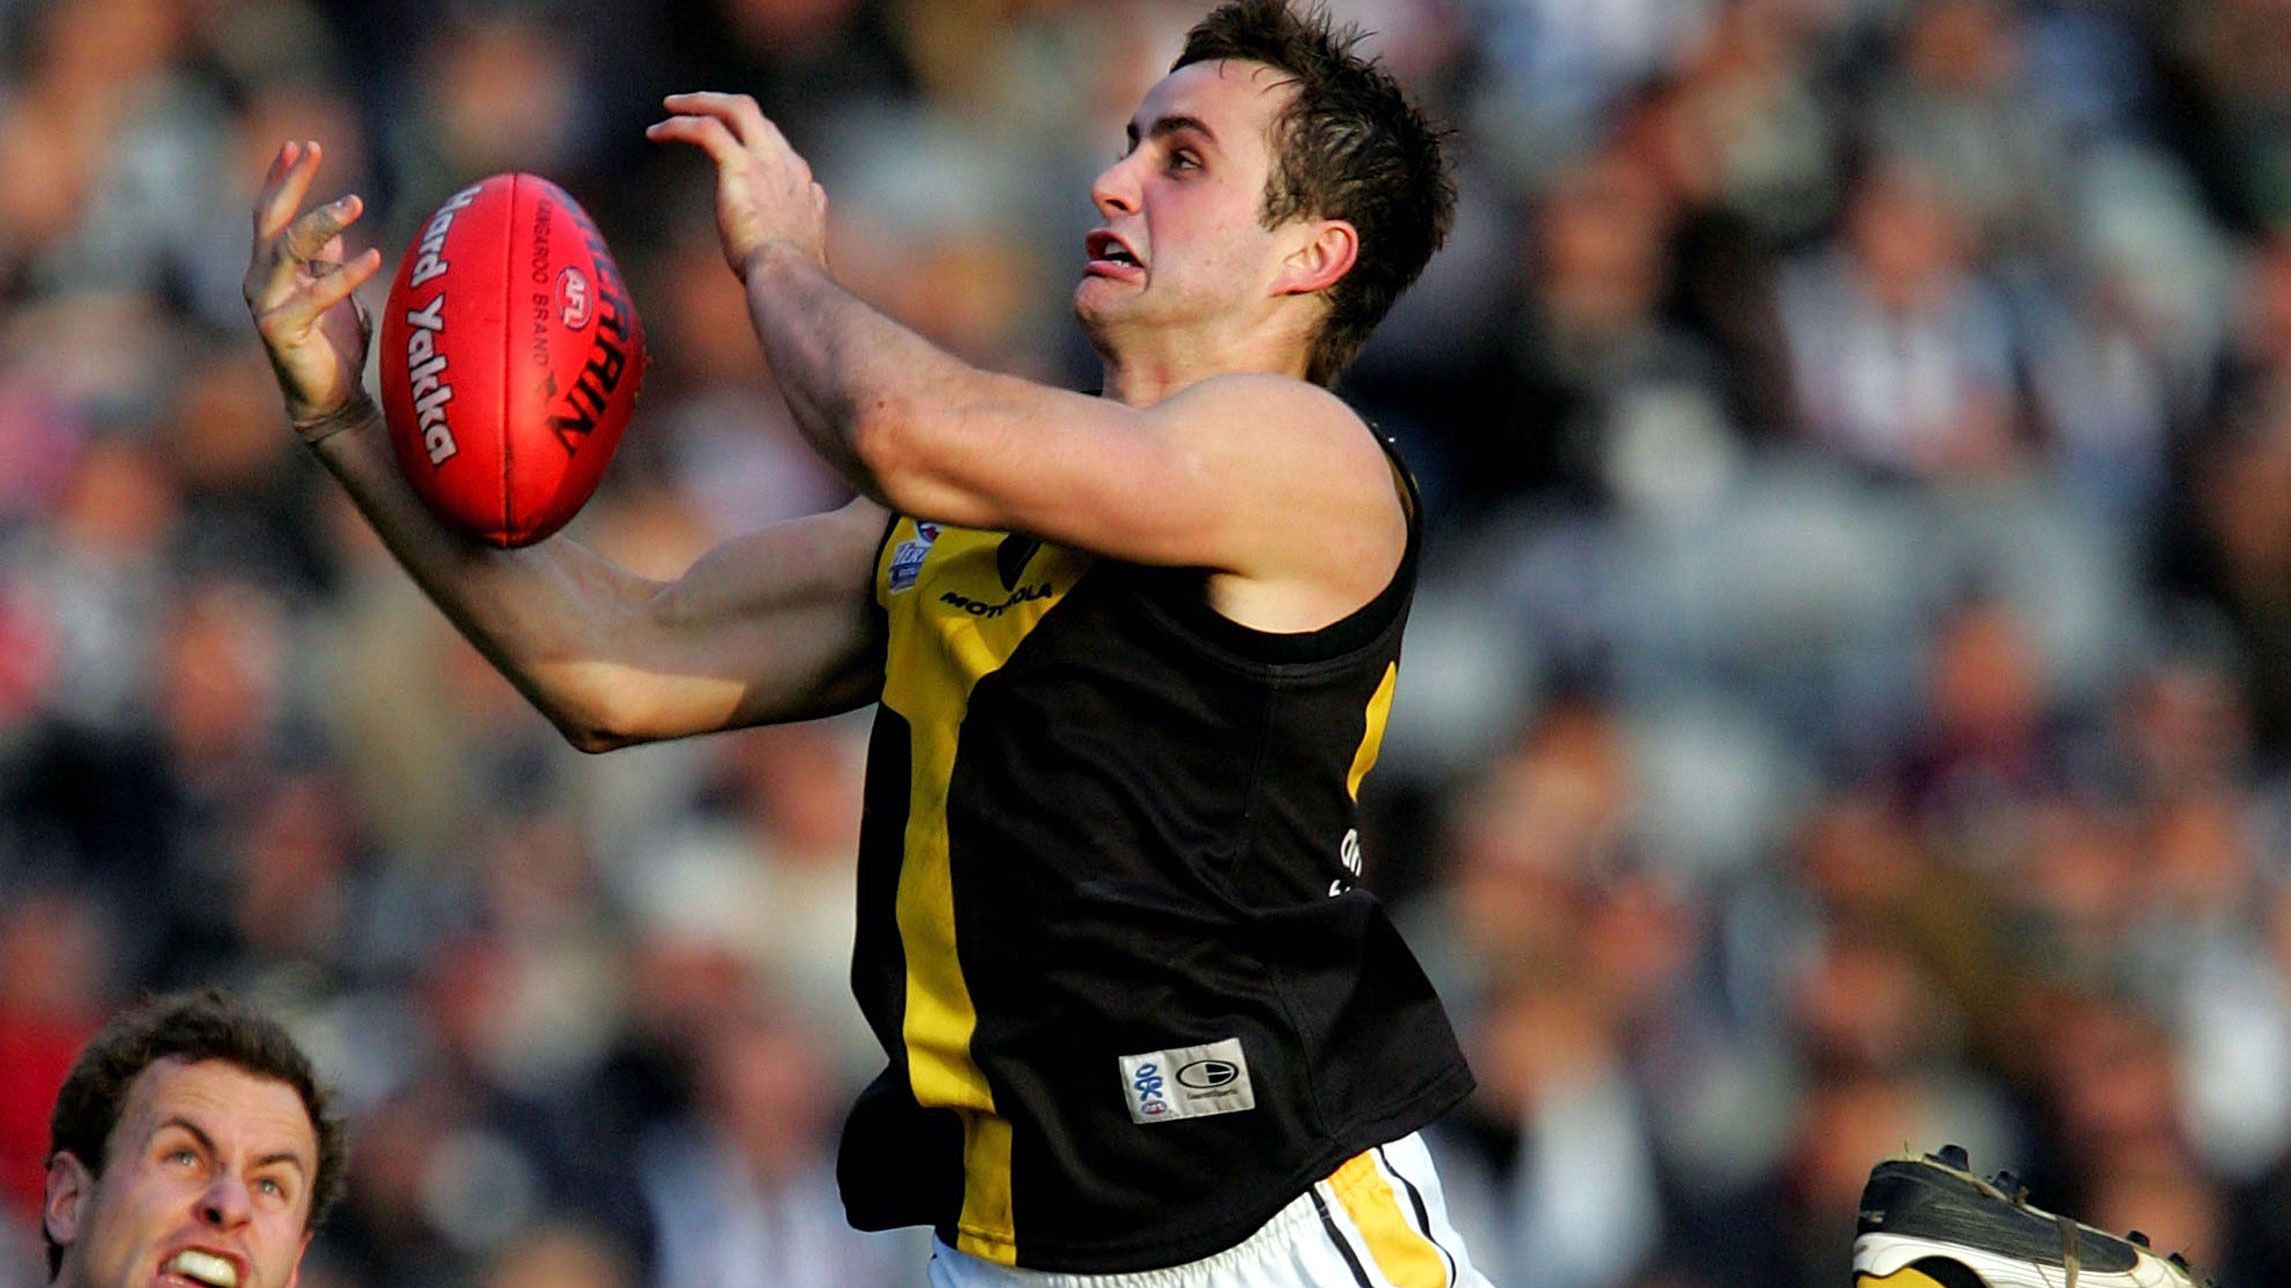 Ex Richmond Tigers player Ty Zantuck cleared to pursue damages claim against club